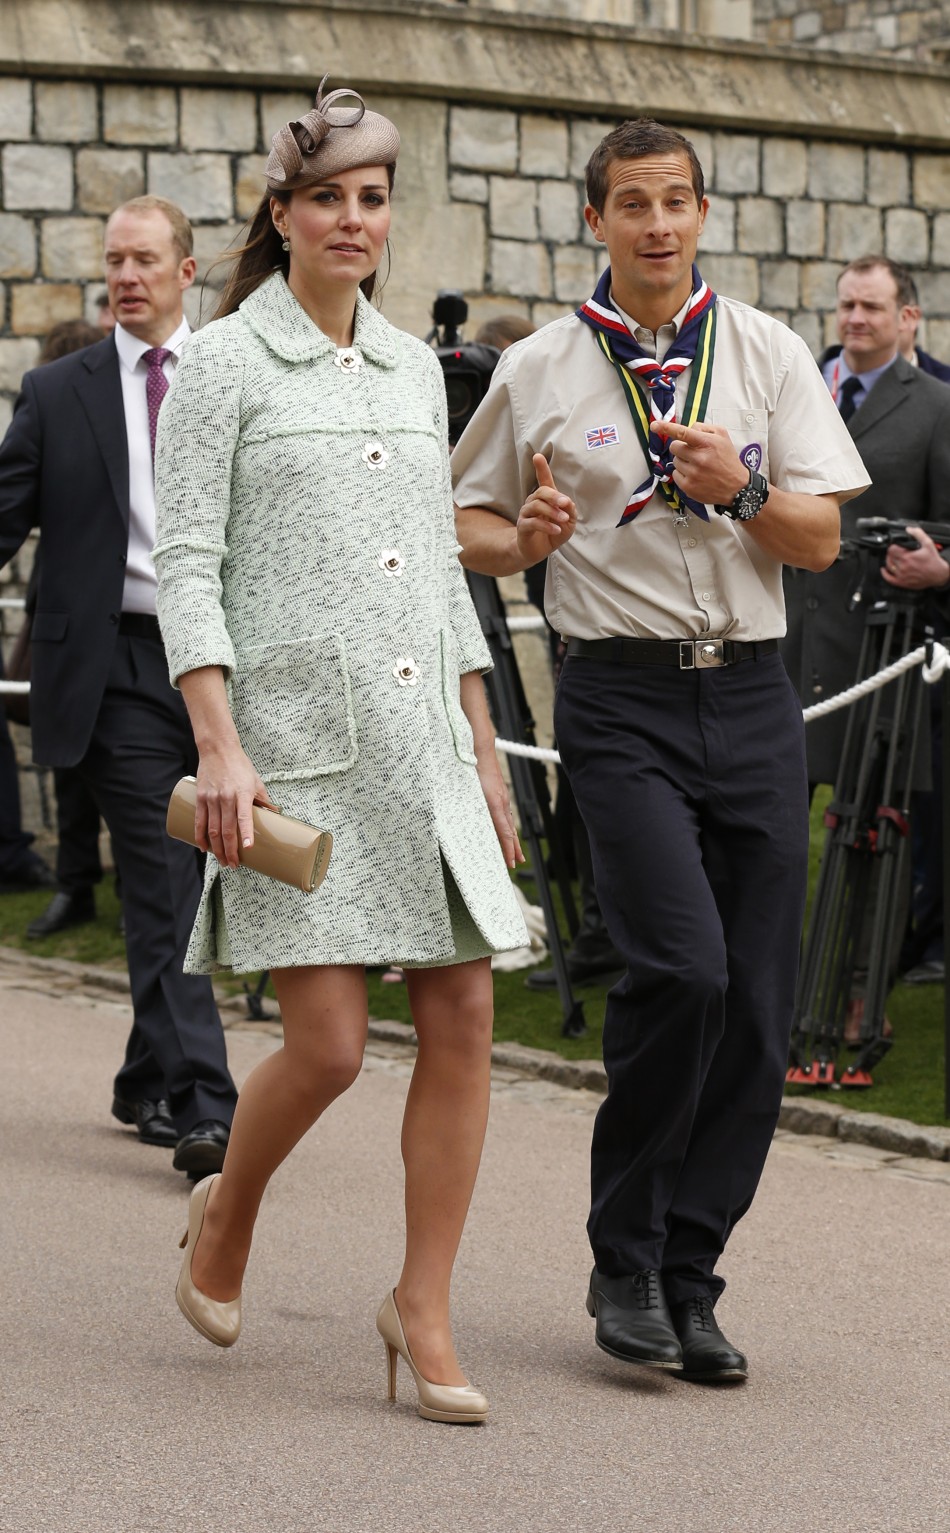 Britains Catherine, Duchess of Cambridge and Chief Scout Bear Grylls R attend the National Review of Queens Scouts at Windsor Castle in Berkshire, near London April 21, 2013.